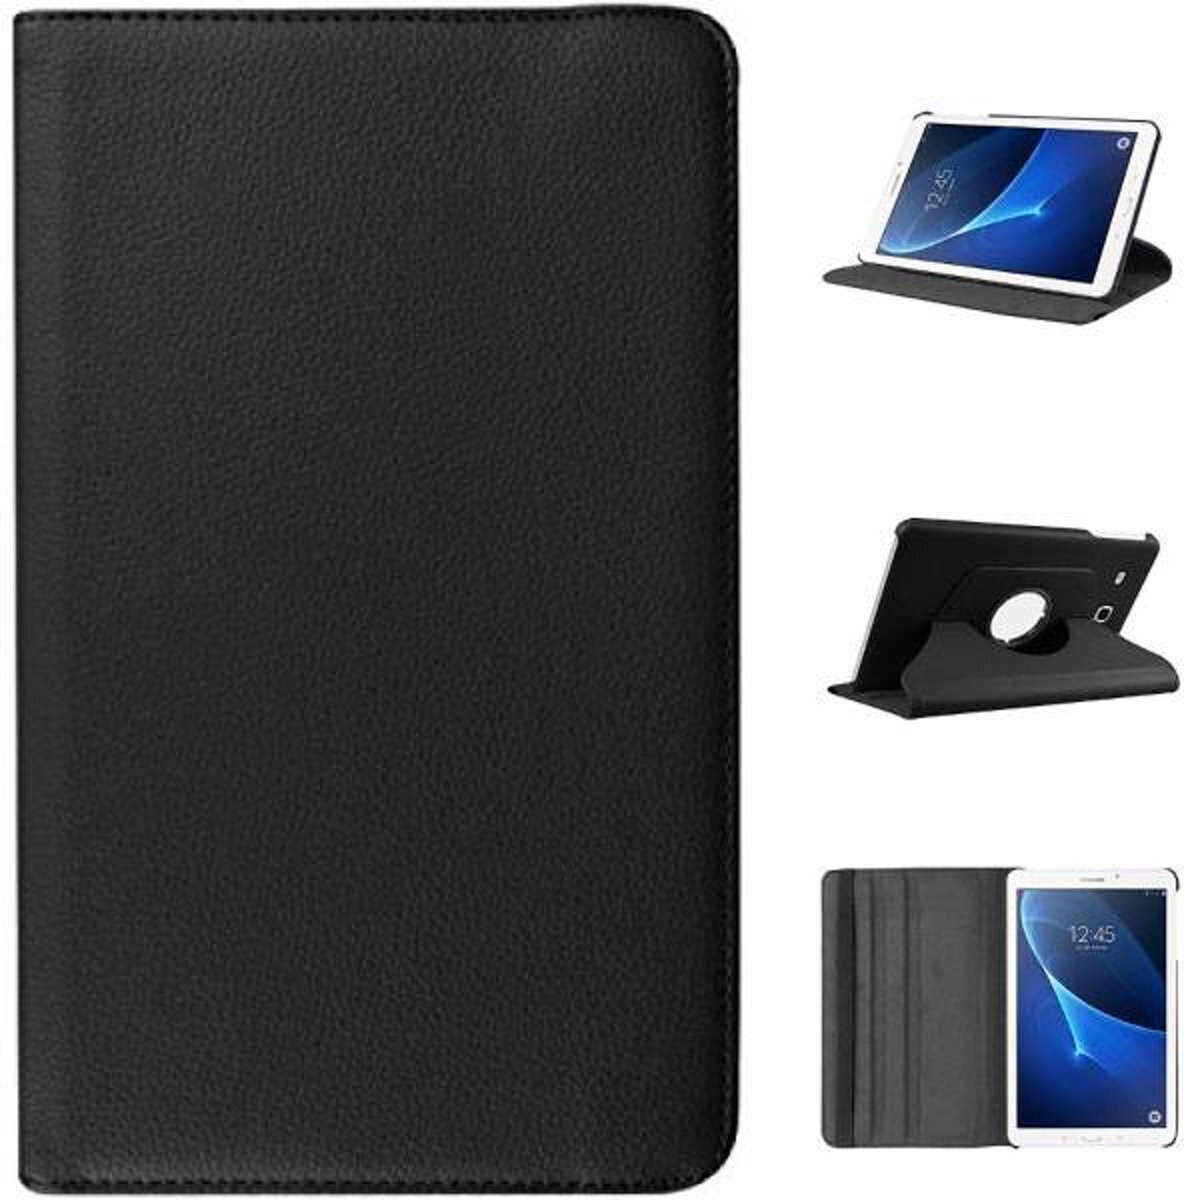 Case2go Draaibare tablet hoes voor de Samsung Galaxy Tab A 10.1 T580 serie